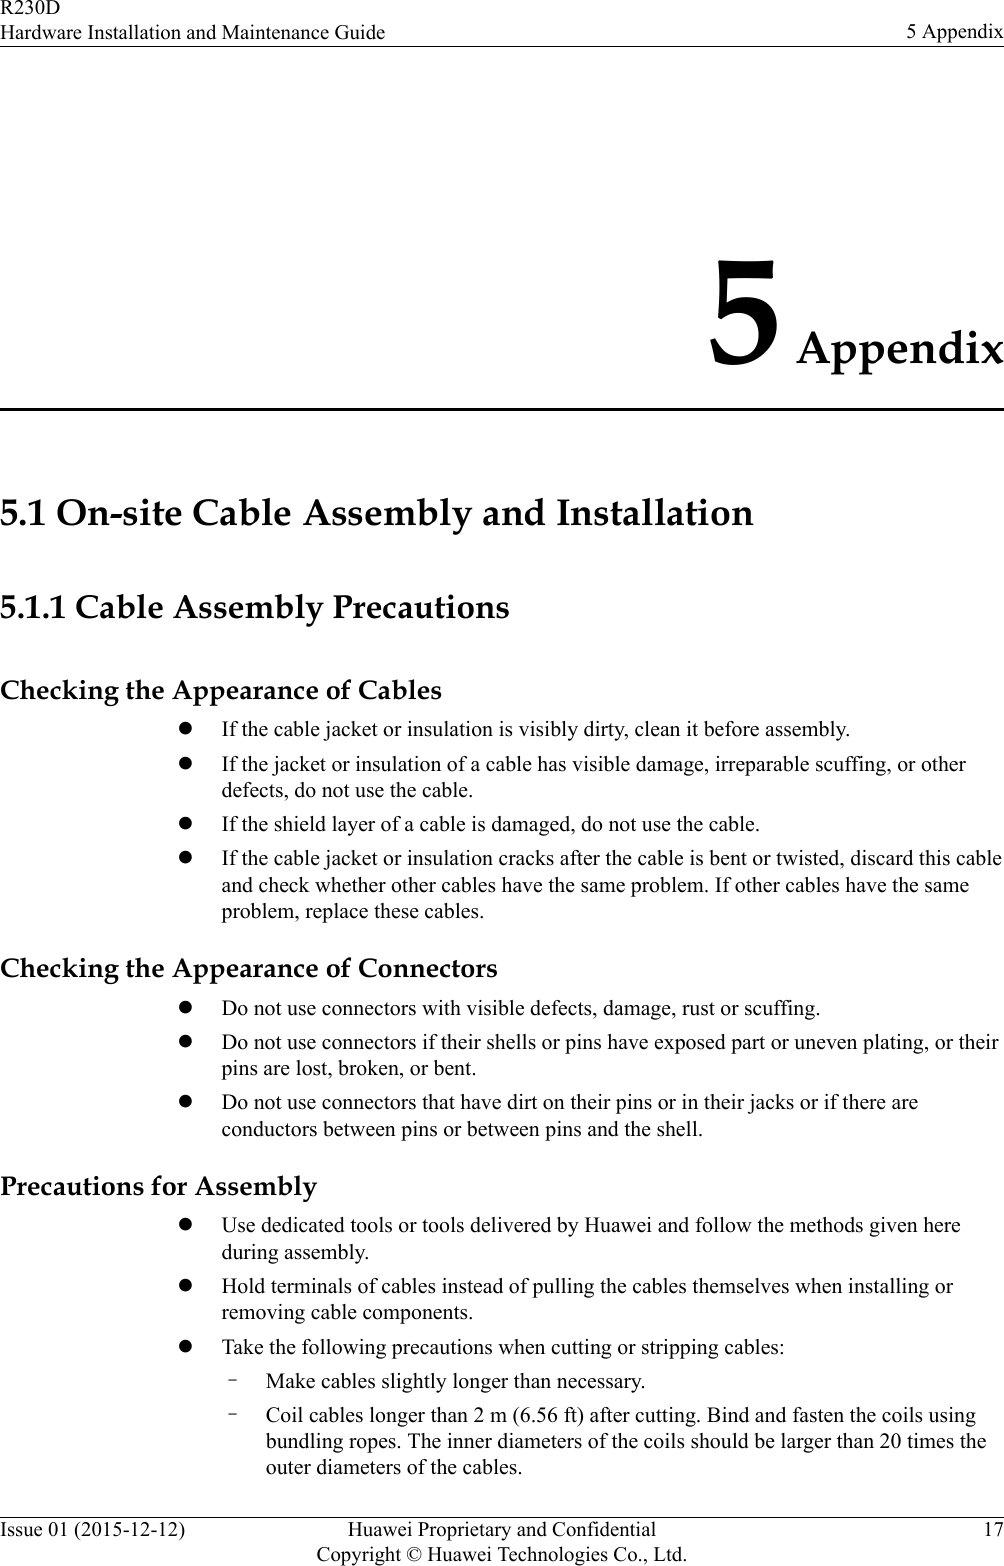 5 Appendix5.1 On-site Cable Assembly and Installation5.1.1 Cable Assembly PrecautionsChecking the Appearance of CableslIf the cable jacket or insulation is visibly dirty, clean it before assembly.lIf the jacket or insulation of a cable has visible damage, irreparable scuffing, or otherdefects, do not use the cable.lIf the shield layer of a cable is damaged, do not use the cable.lIf the cable jacket or insulation cracks after the cable is bent or twisted, discard this cableand check whether other cables have the same problem. If other cables have the sameproblem, replace these cables.Checking the Appearance of ConnectorslDo not use connectors with visible defects, damage, rust or scuffing.lDo not use connectors if their shells or pins have exposed part or uneven plating, or theirpins are lost, broken, or bent.lDo not use connectors that have dirt on their pins or in their jacks or if there areconductors between pins or between pins and the shell.Precautions for AssemblylUse dedicated tools or tools delivered by Huawei and follow the methods given hereduring assembly.lHold terminals of cables instead of pulling the cables themselves when installing orremoving cable components.lTake the following precautions when cutting or stripping cables:–Make cables slightly longer than necessary.–Coil cables longer than 2 m (6.56 ft) after cutting. Bind and fasten the coils usingbundling ropes. The inner diameters of the coils should be larger than 20 times theouter diameters of the cables.R230DHardware Installation and Maintenance Guide 5 AppendixIssue 01 (2015-12-12) Huawei Proprietary and ConfidentialCopyright © Huawei Technologies Co., Ltd.17